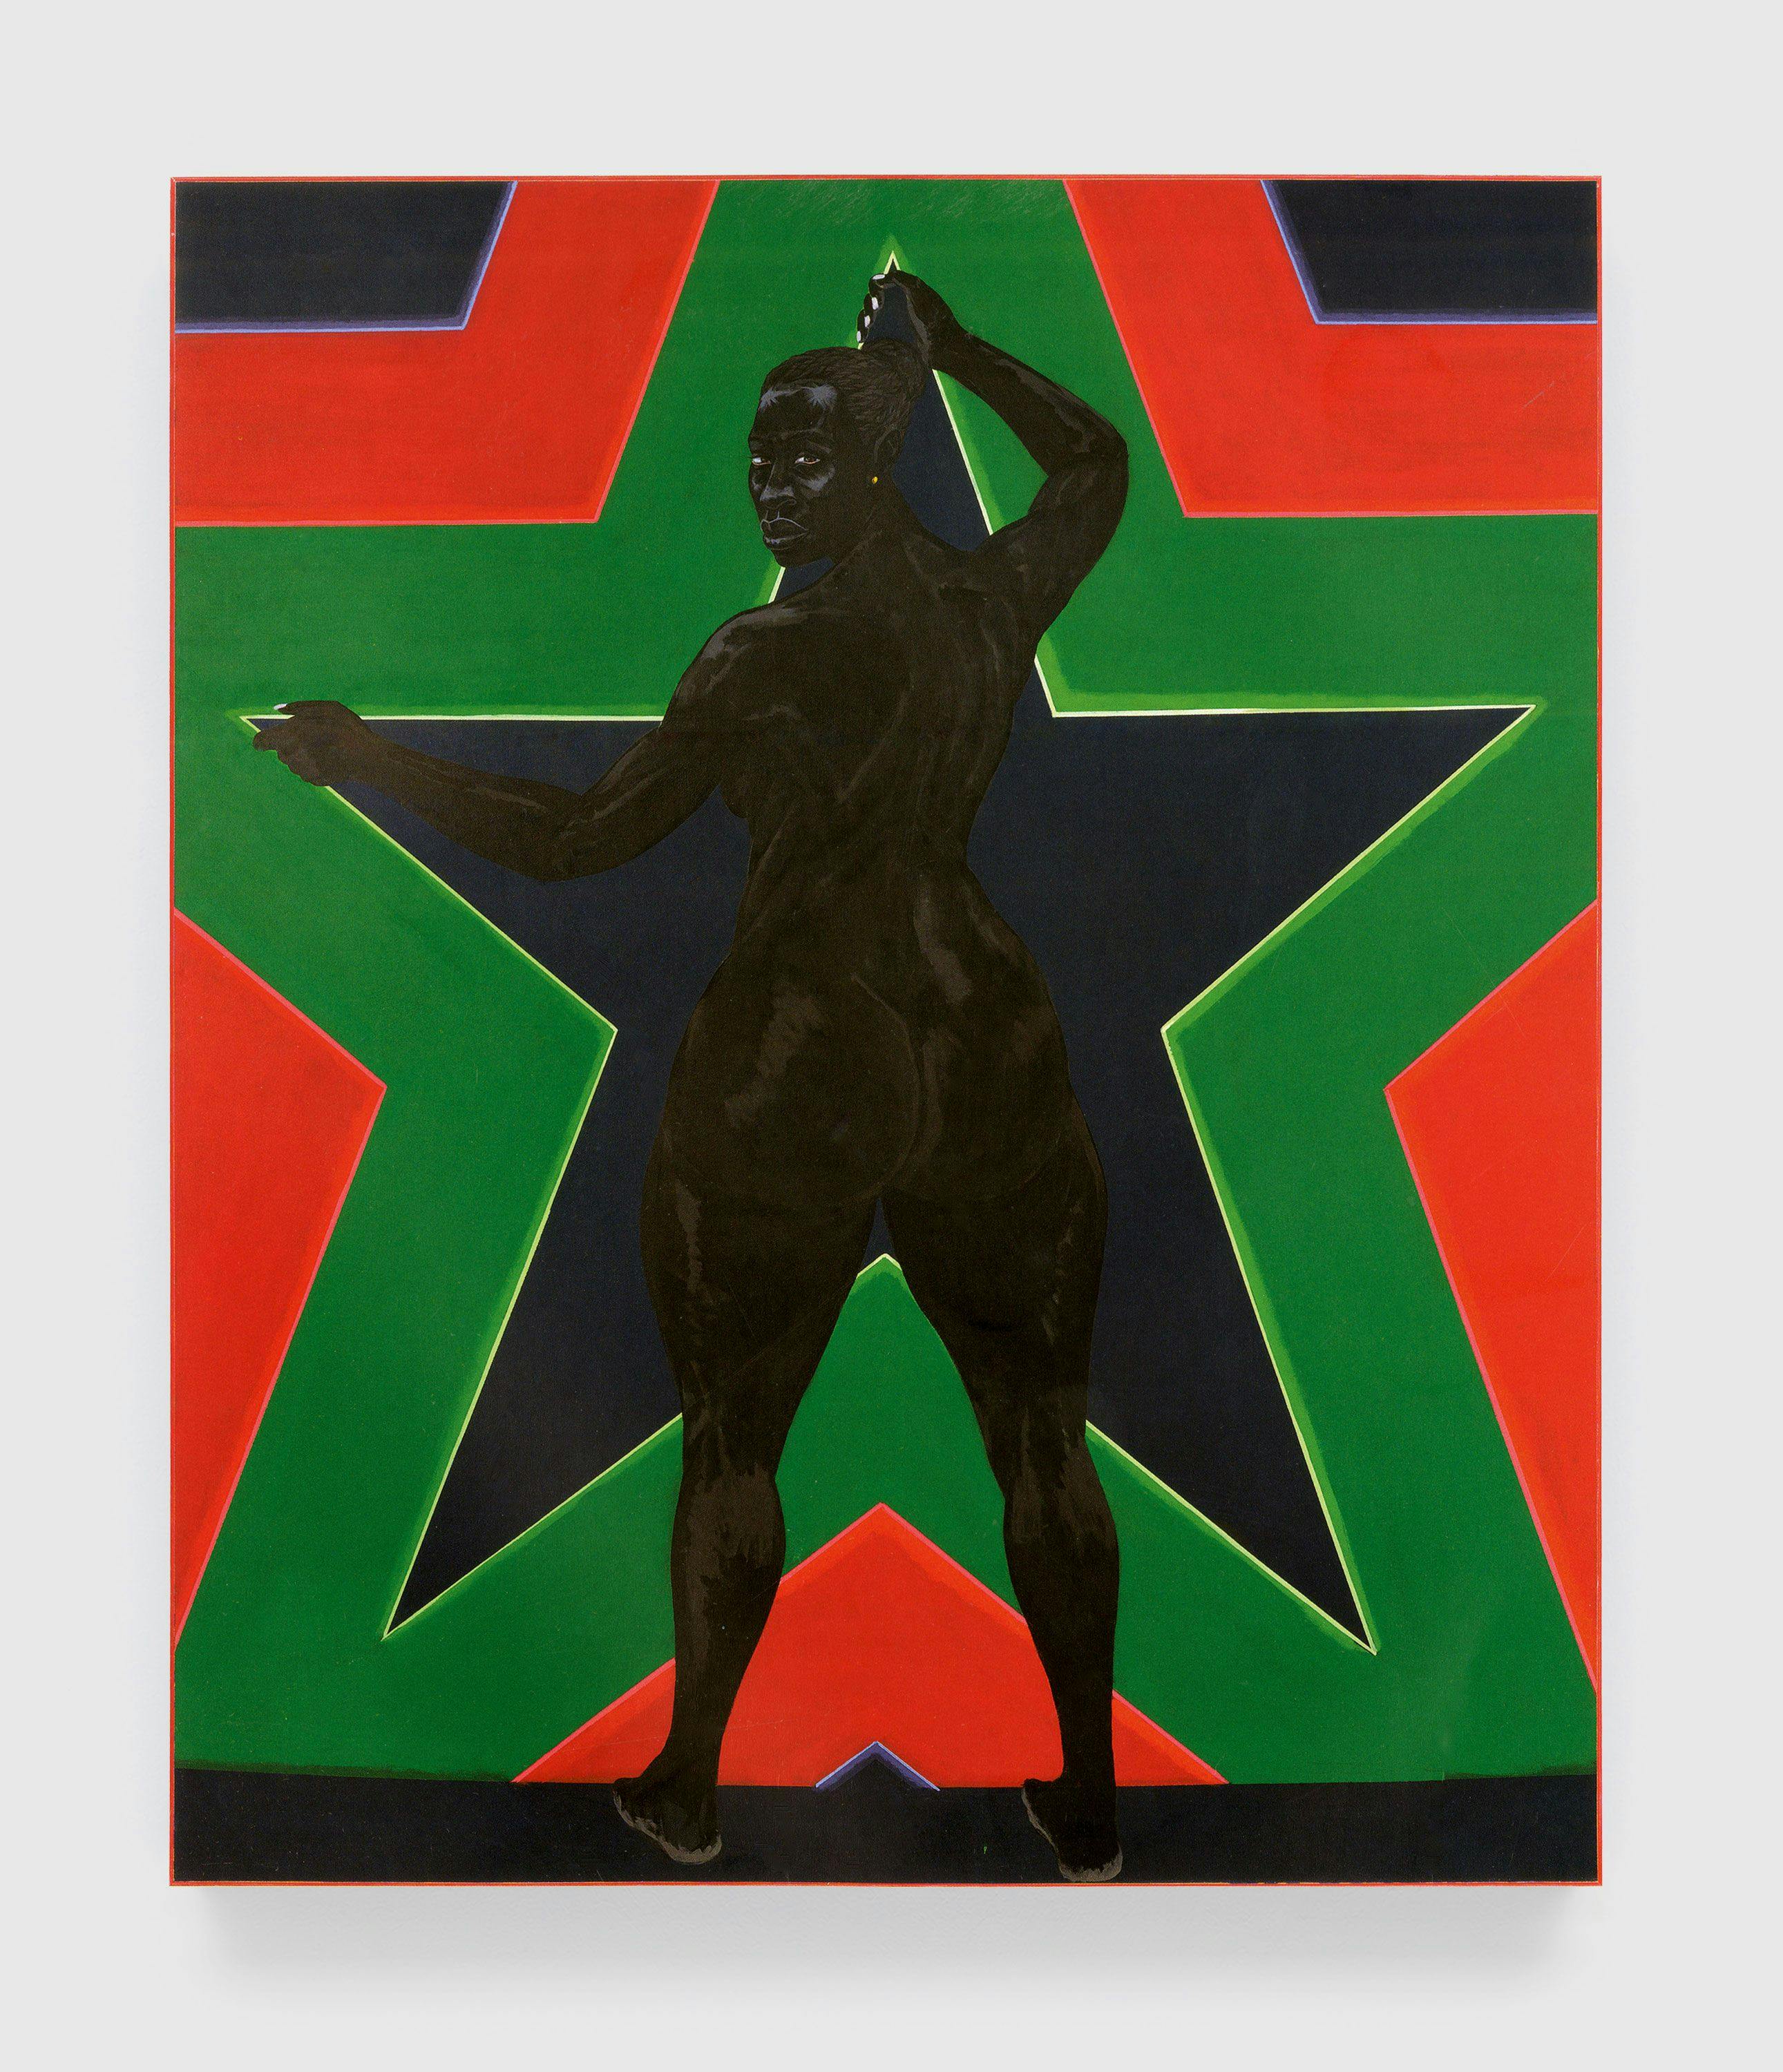 A painting by Kerry James Marshall, titled Black Star 2, dated 2012.